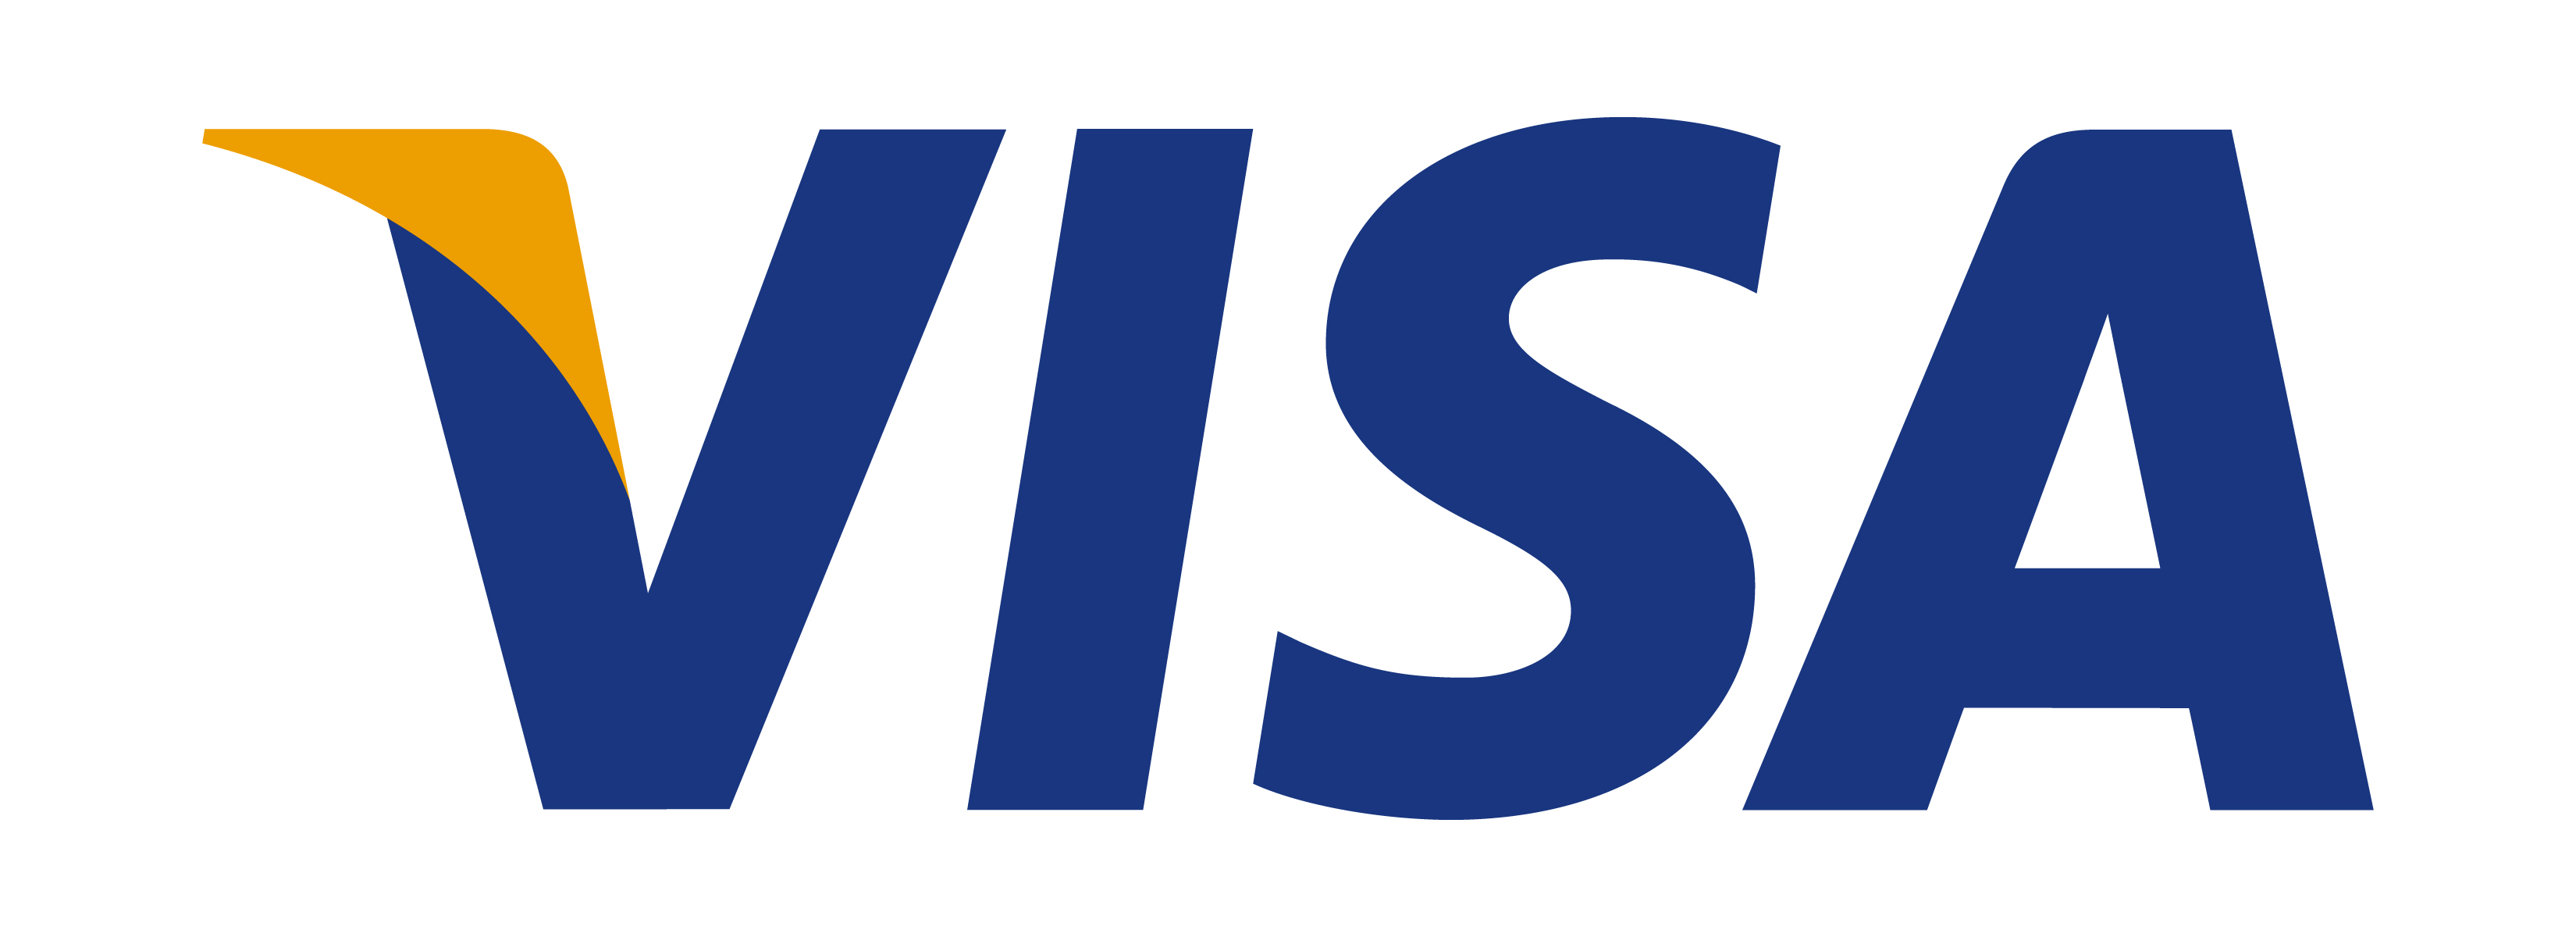 Visa And StubHub Promise Beneficial Deals to Customers 